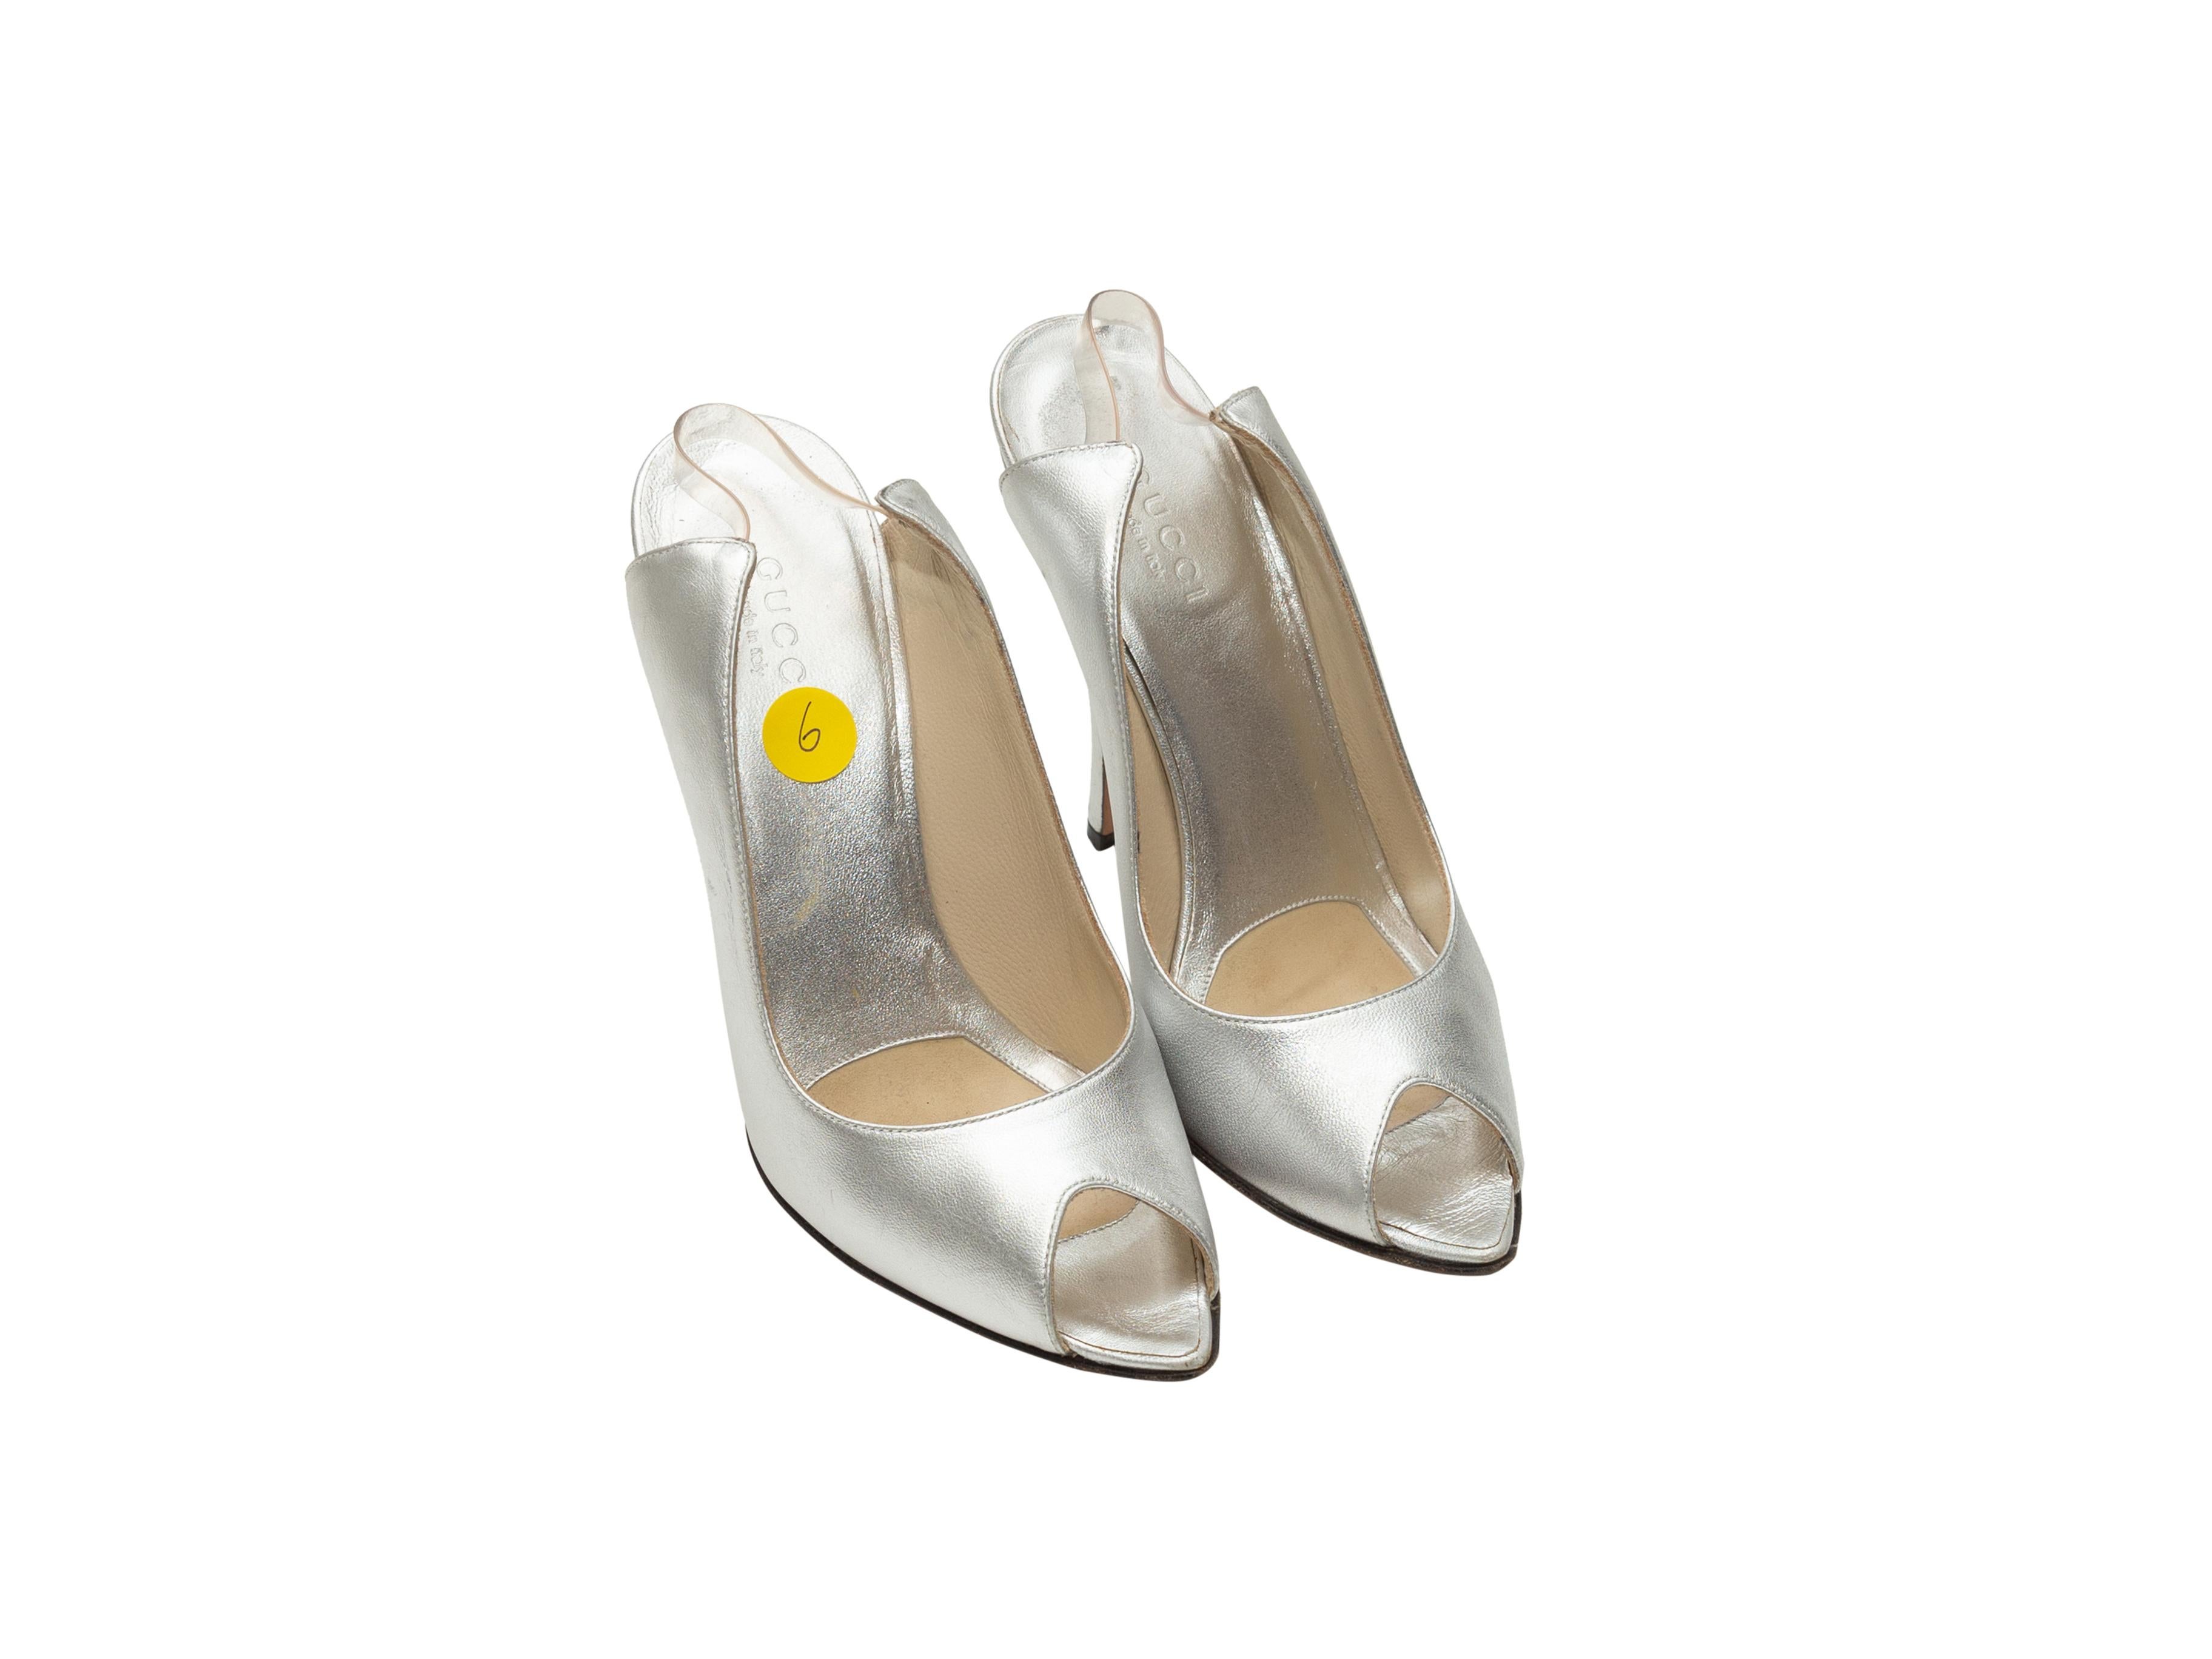 Product details: Silver metallic leather peep-toe pumps by Gucci. Clear slingback straps. Designer size 36. 4